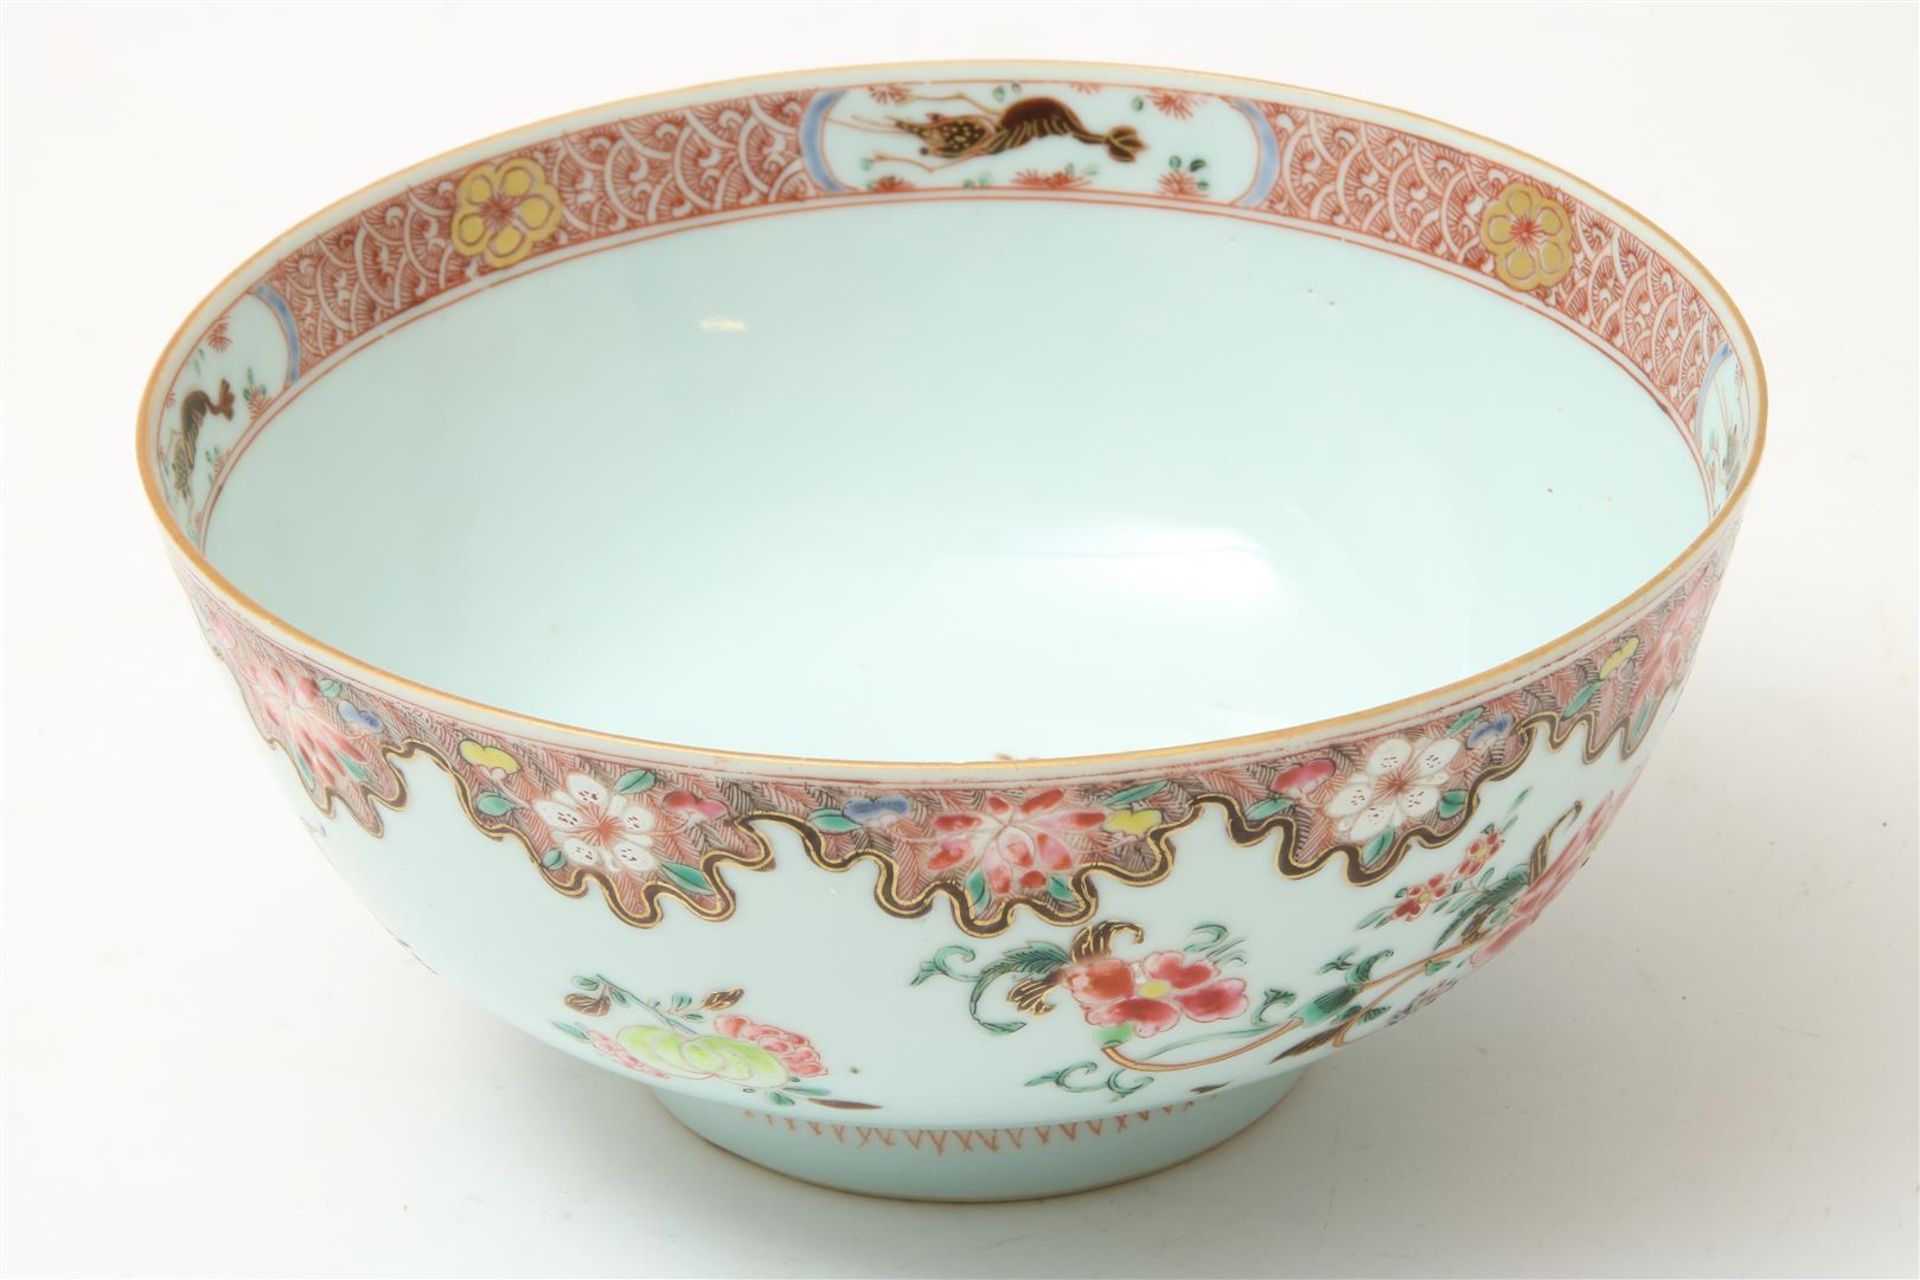 Porcelain Famille-Rose bowl decorated with gold, the interior with flower decoration under the rim - Image 2 of 4